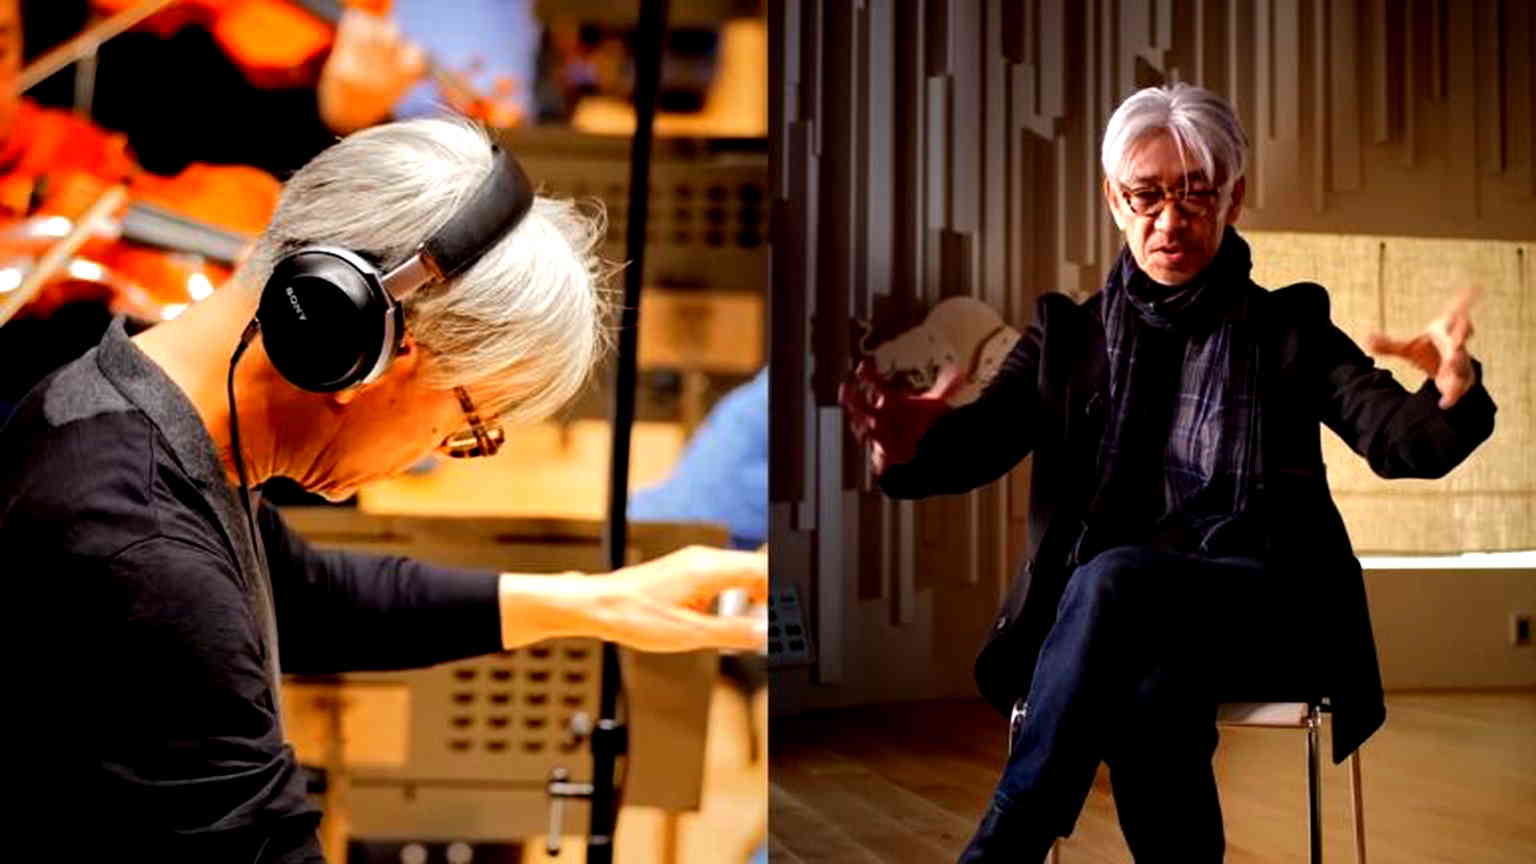 Late composer Ryuichi Sakamoto to be honored in free online series from UMass